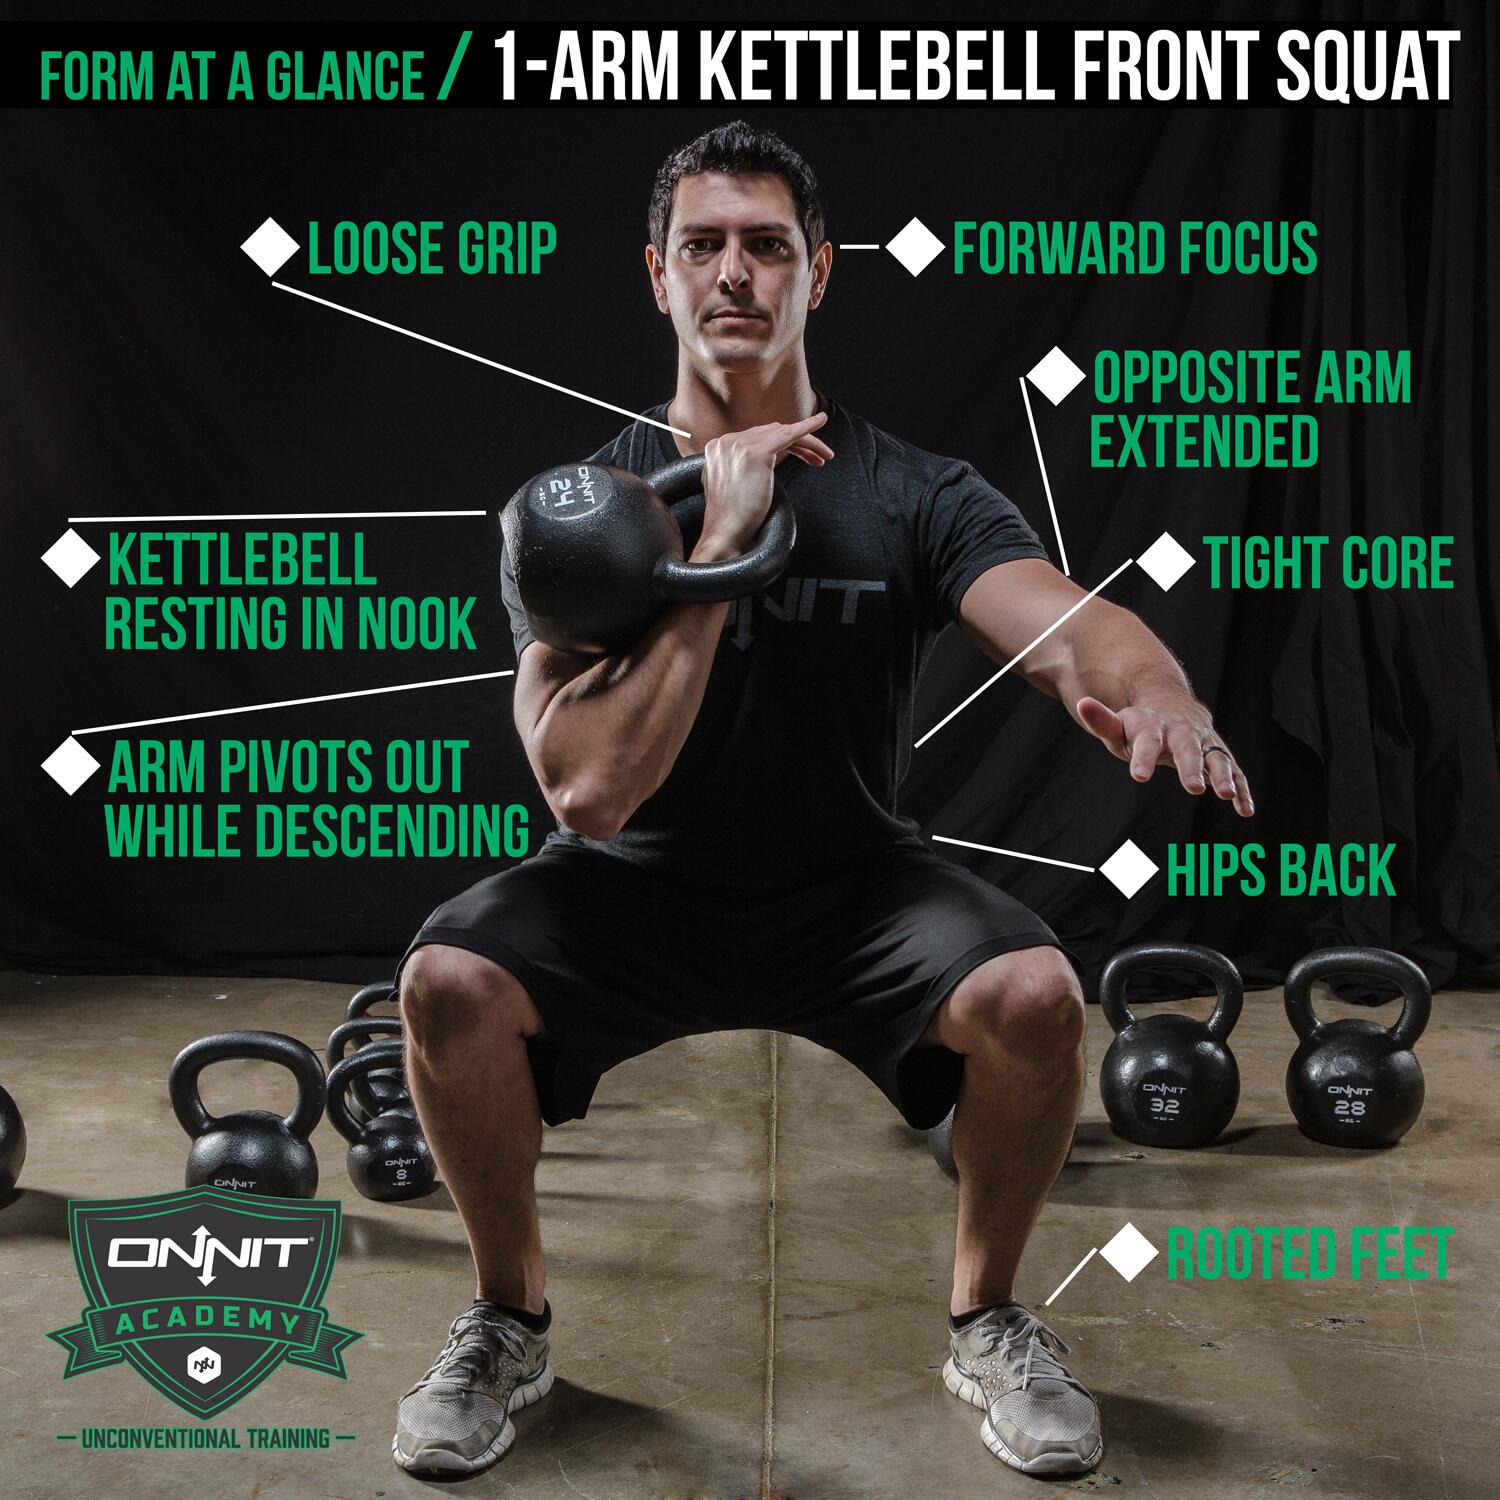 taktik sneen kompensere Onnit on Twitter: "Form at a Glance: 1-Hand Kettlebell Front Squat  http://t.co/NitxPmcDRr" / Twitter